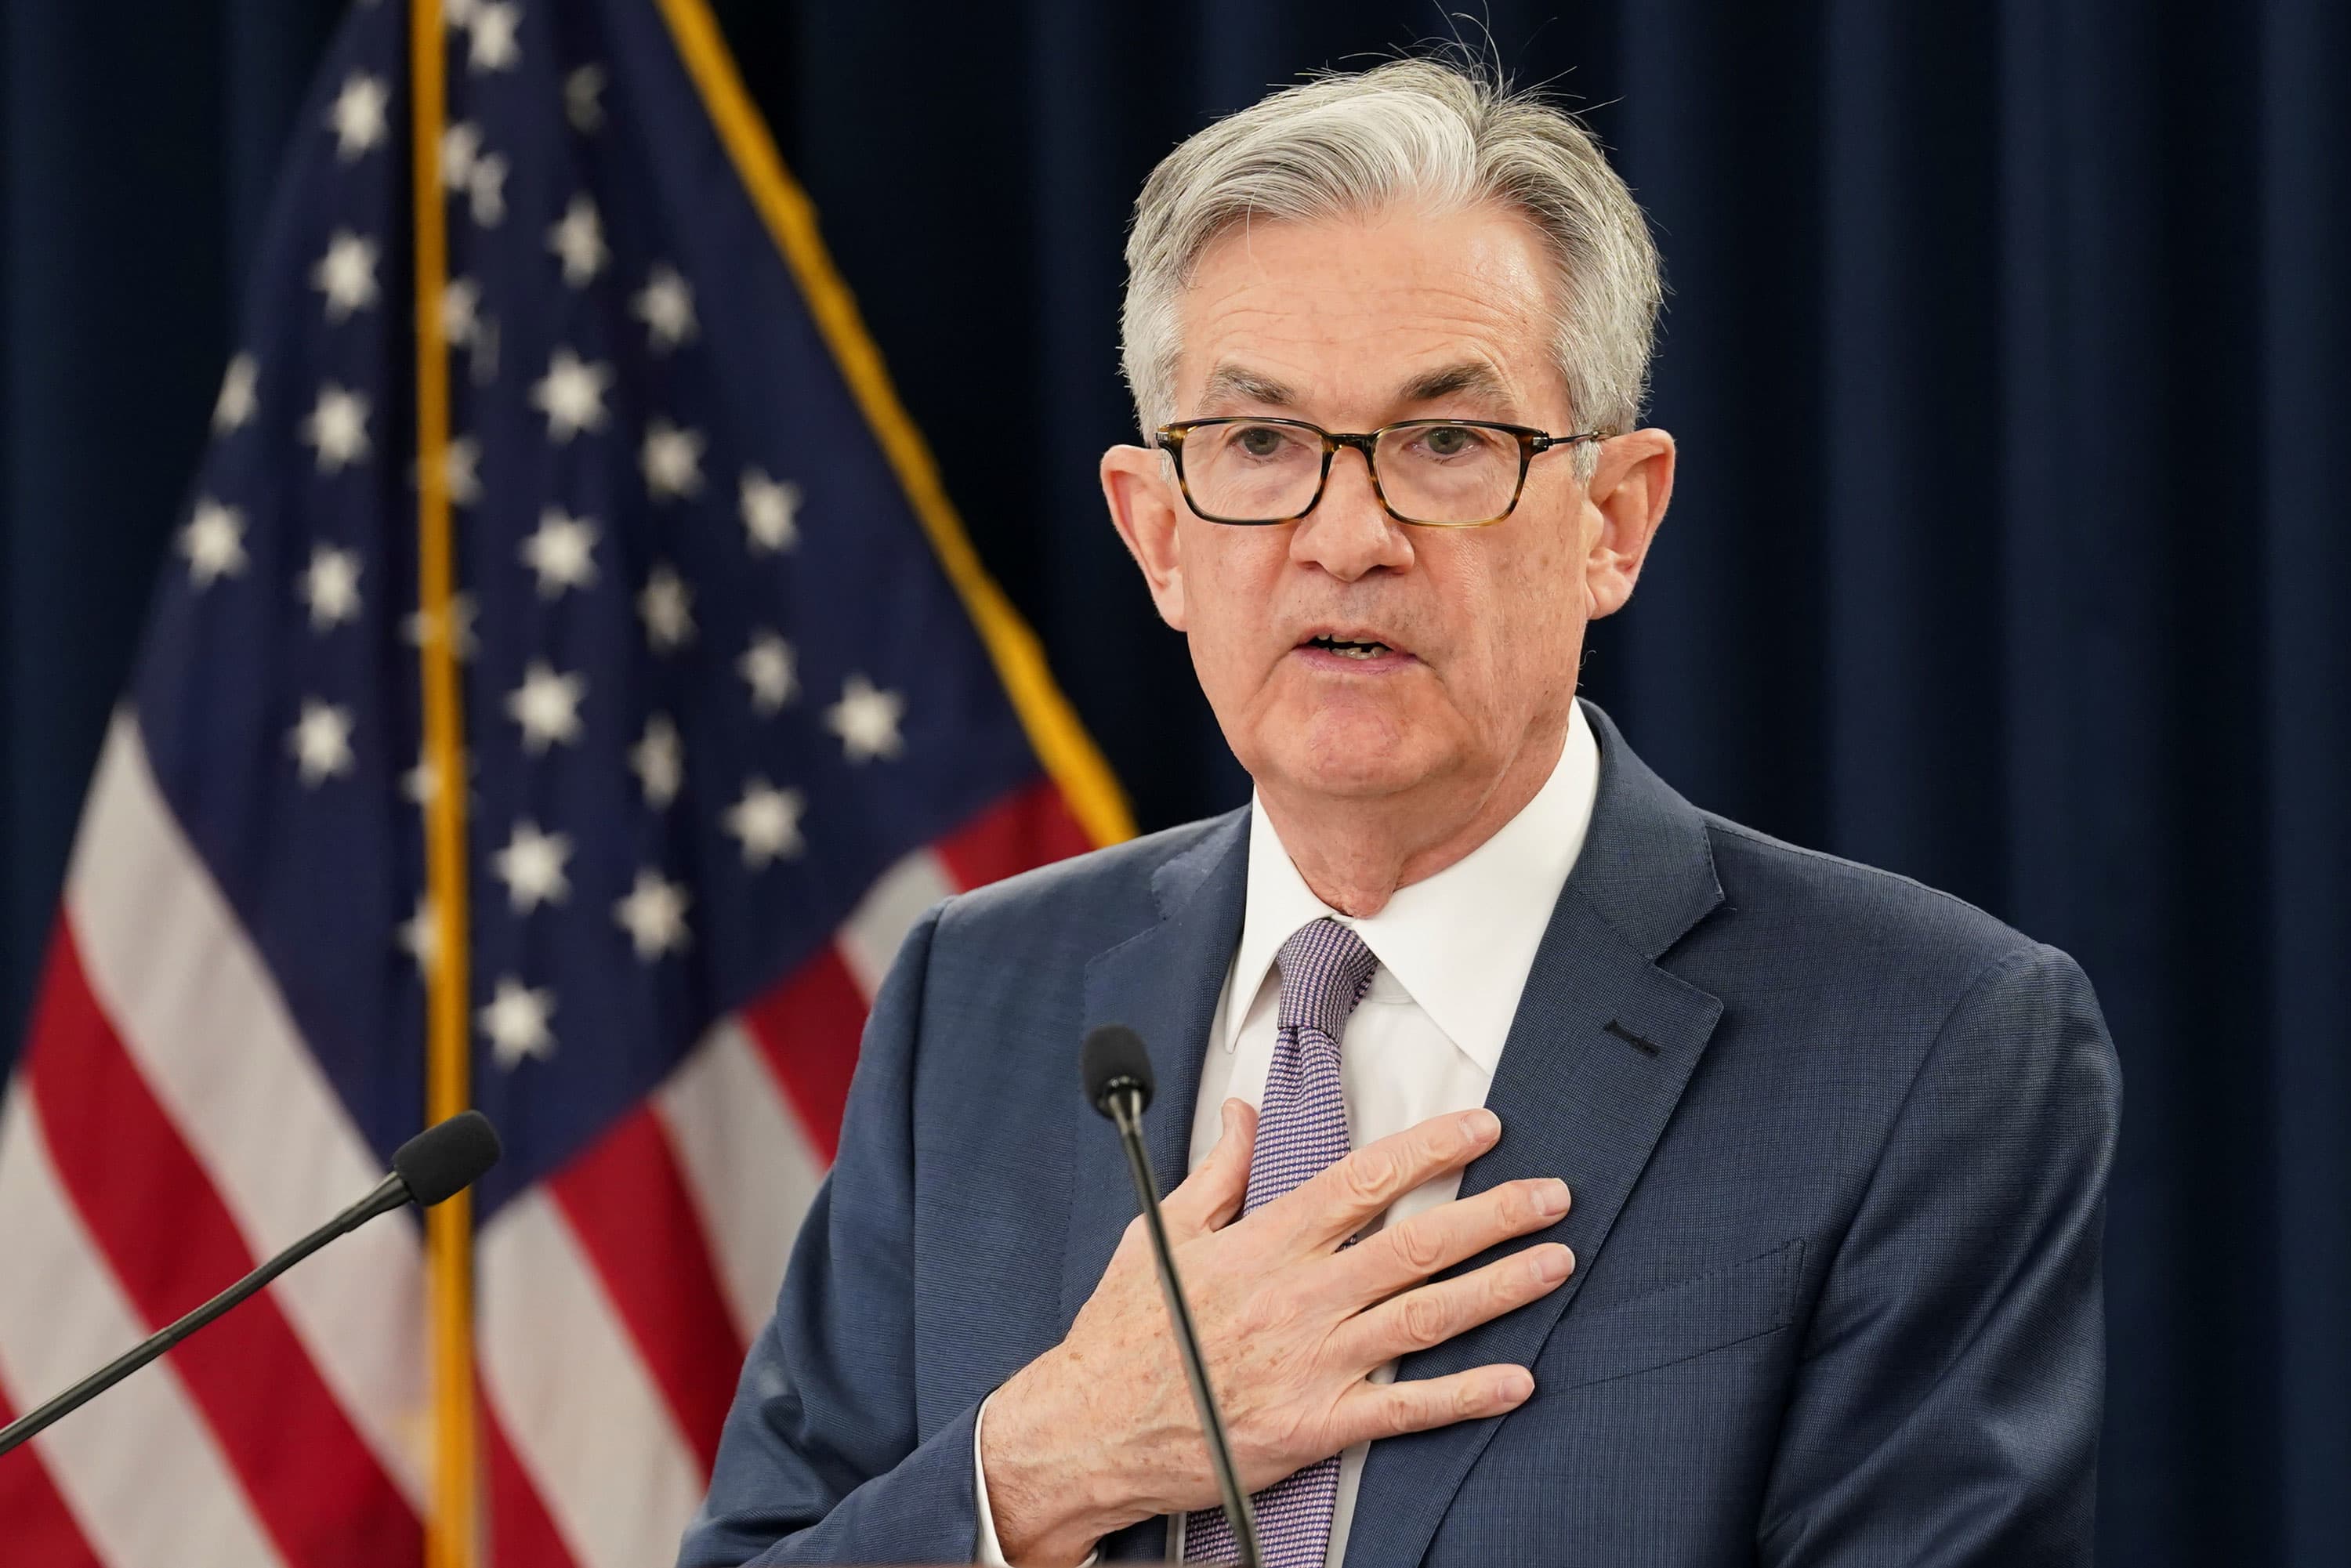 Powell Announces New Fed Approach To Inflation That Could Keep Rates Lower For Longer